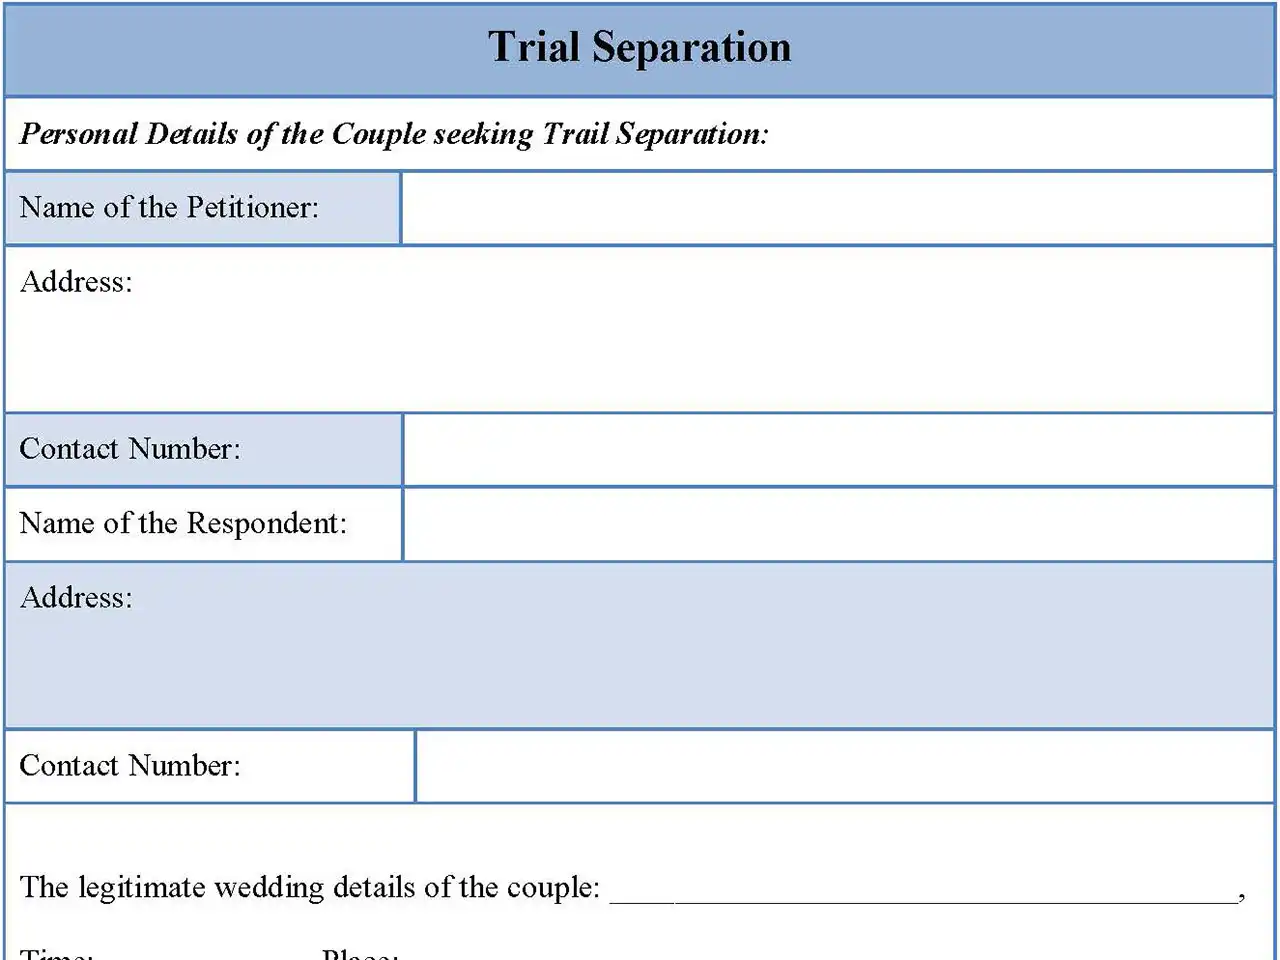 Trial separation form